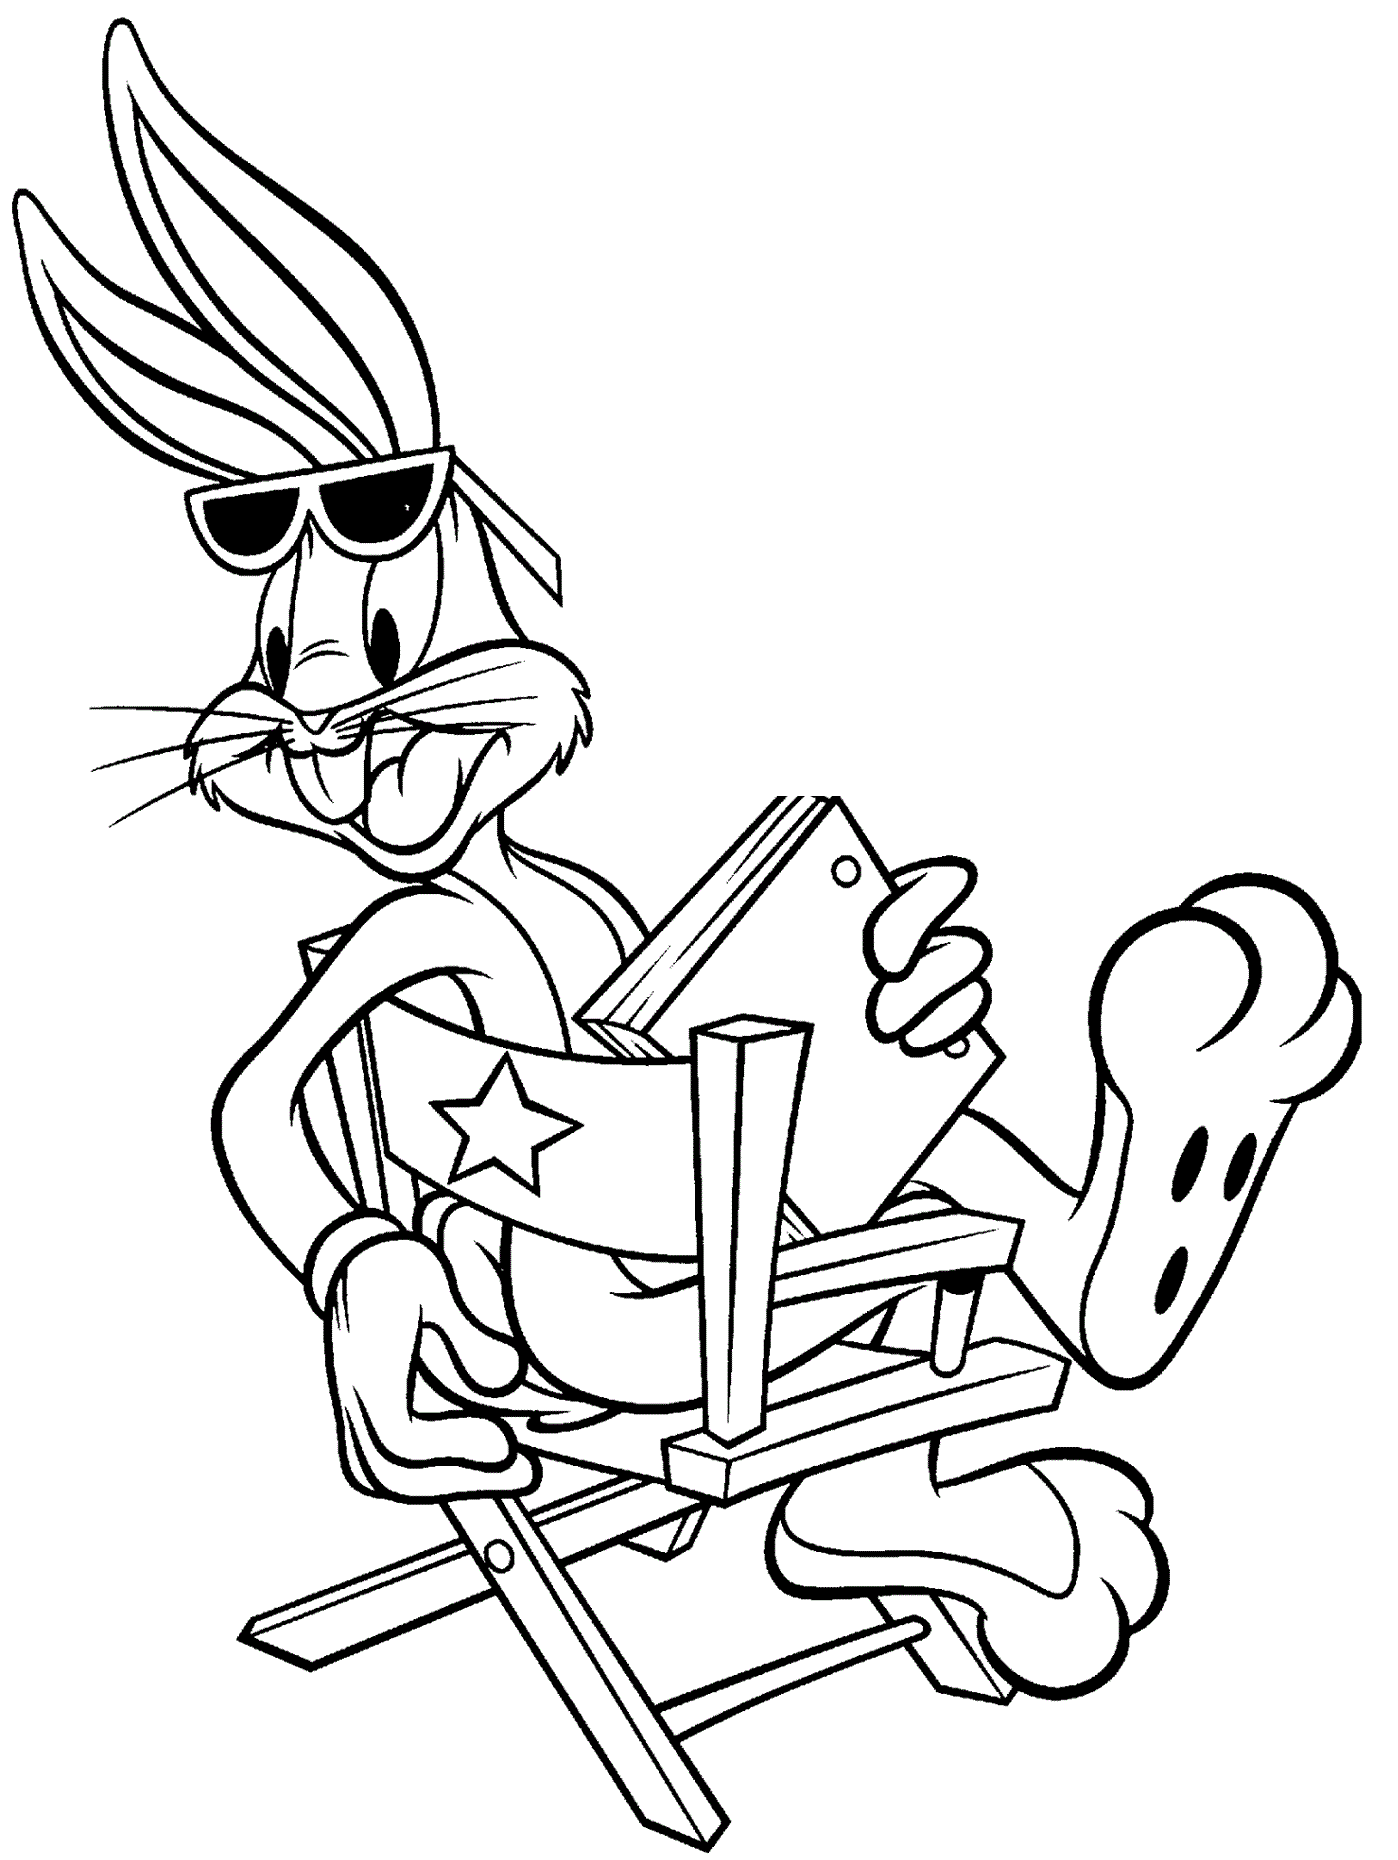 Bugs Bunny Coloring Pages Cartoons of Bugs Bunny Printable 2020 1422 Coloring4free